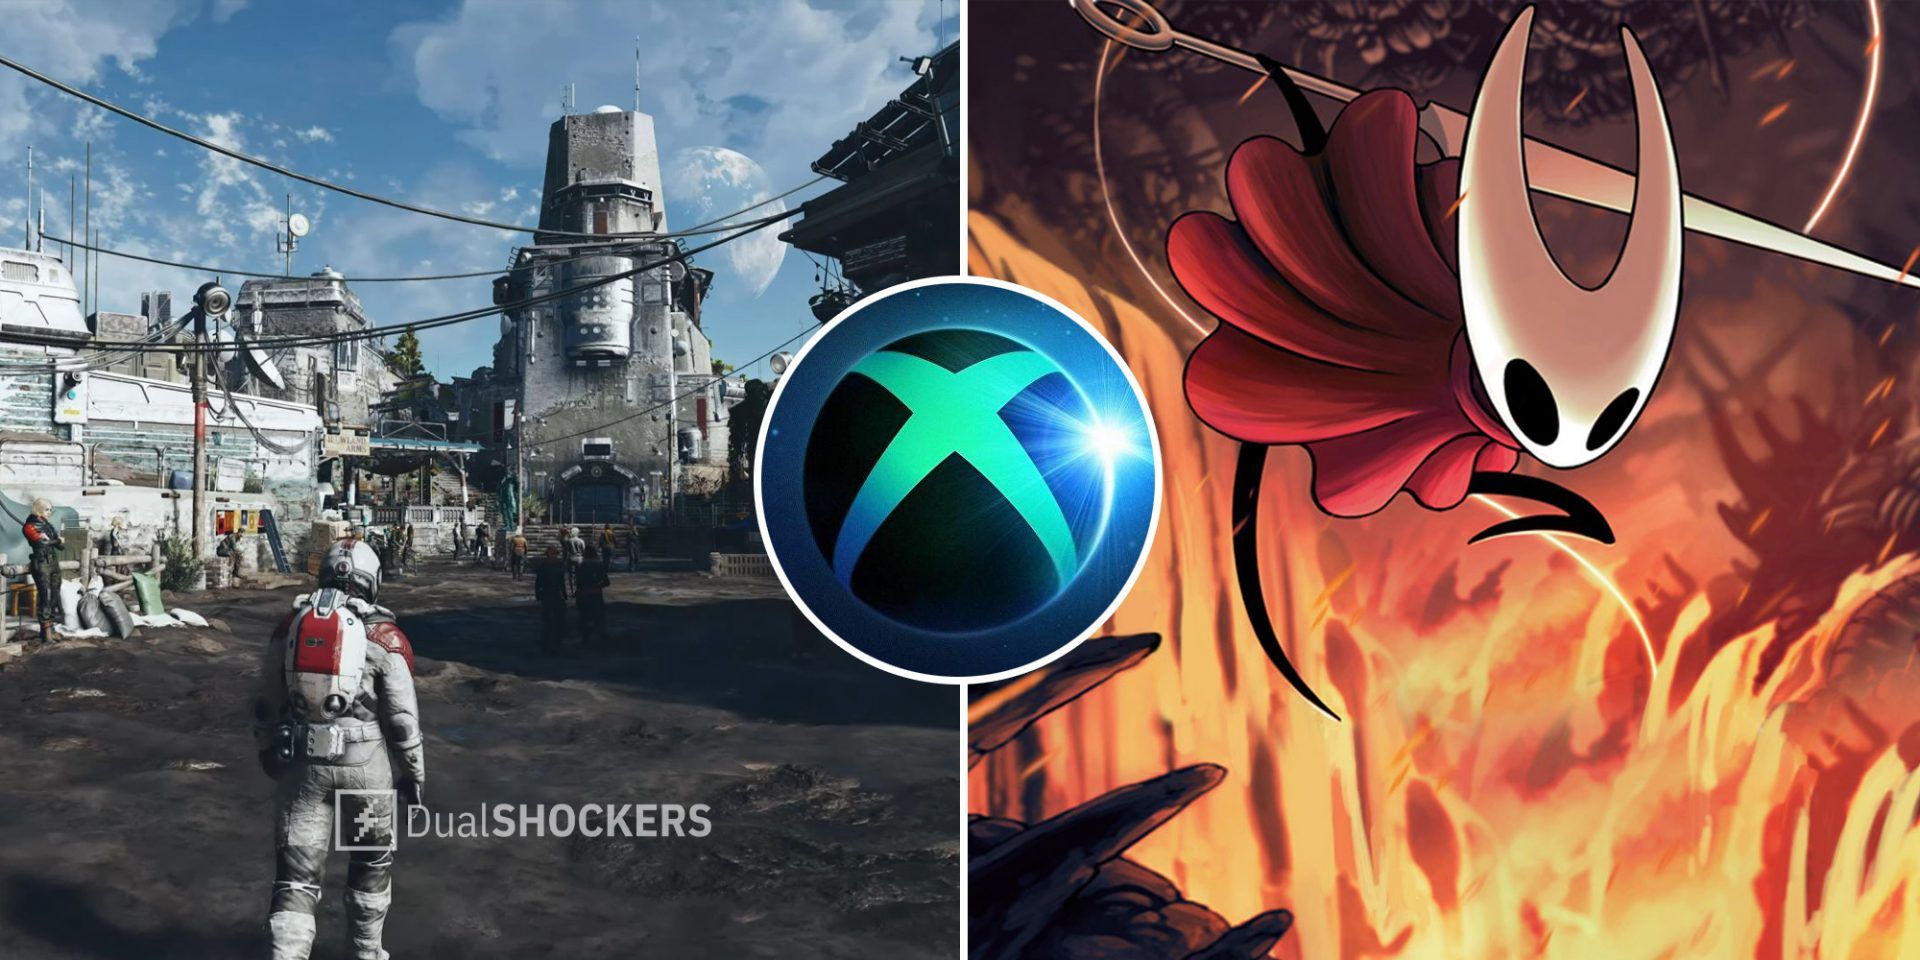 Starfield new game by Bethesda on left, Xbox showcase logo in middle, Hollow Knight Silksong new game on right